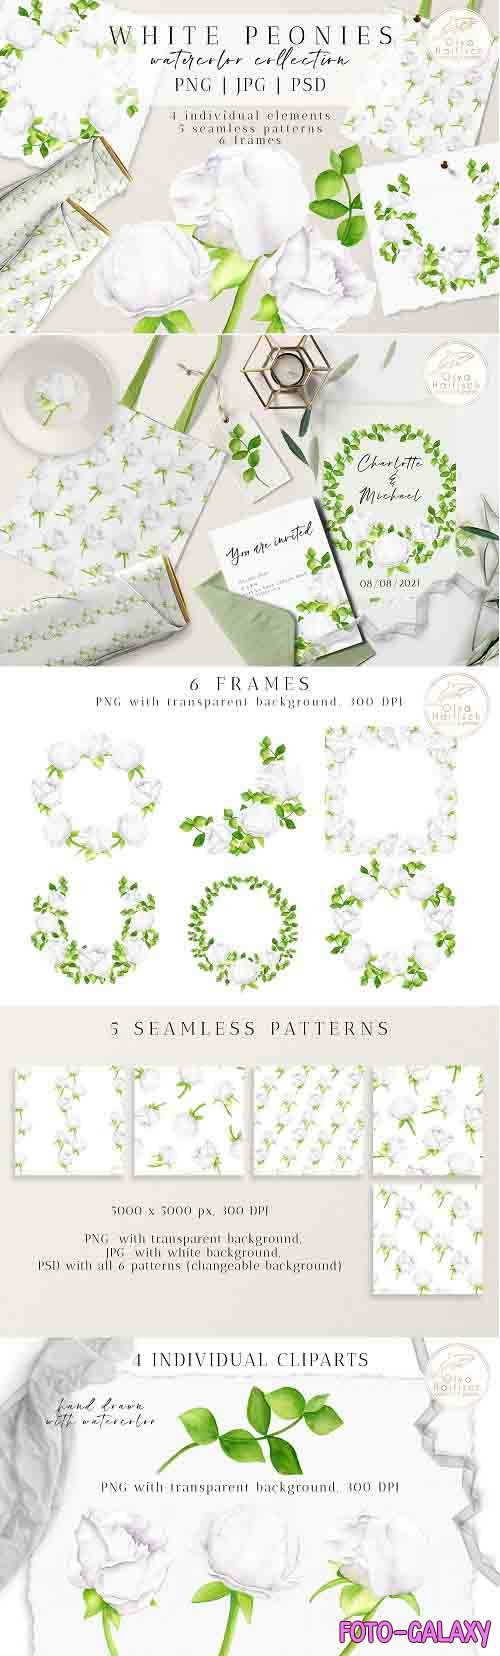 Watercolor Peony Flowers Clipart Collection. Floral Wreaths - 1336487